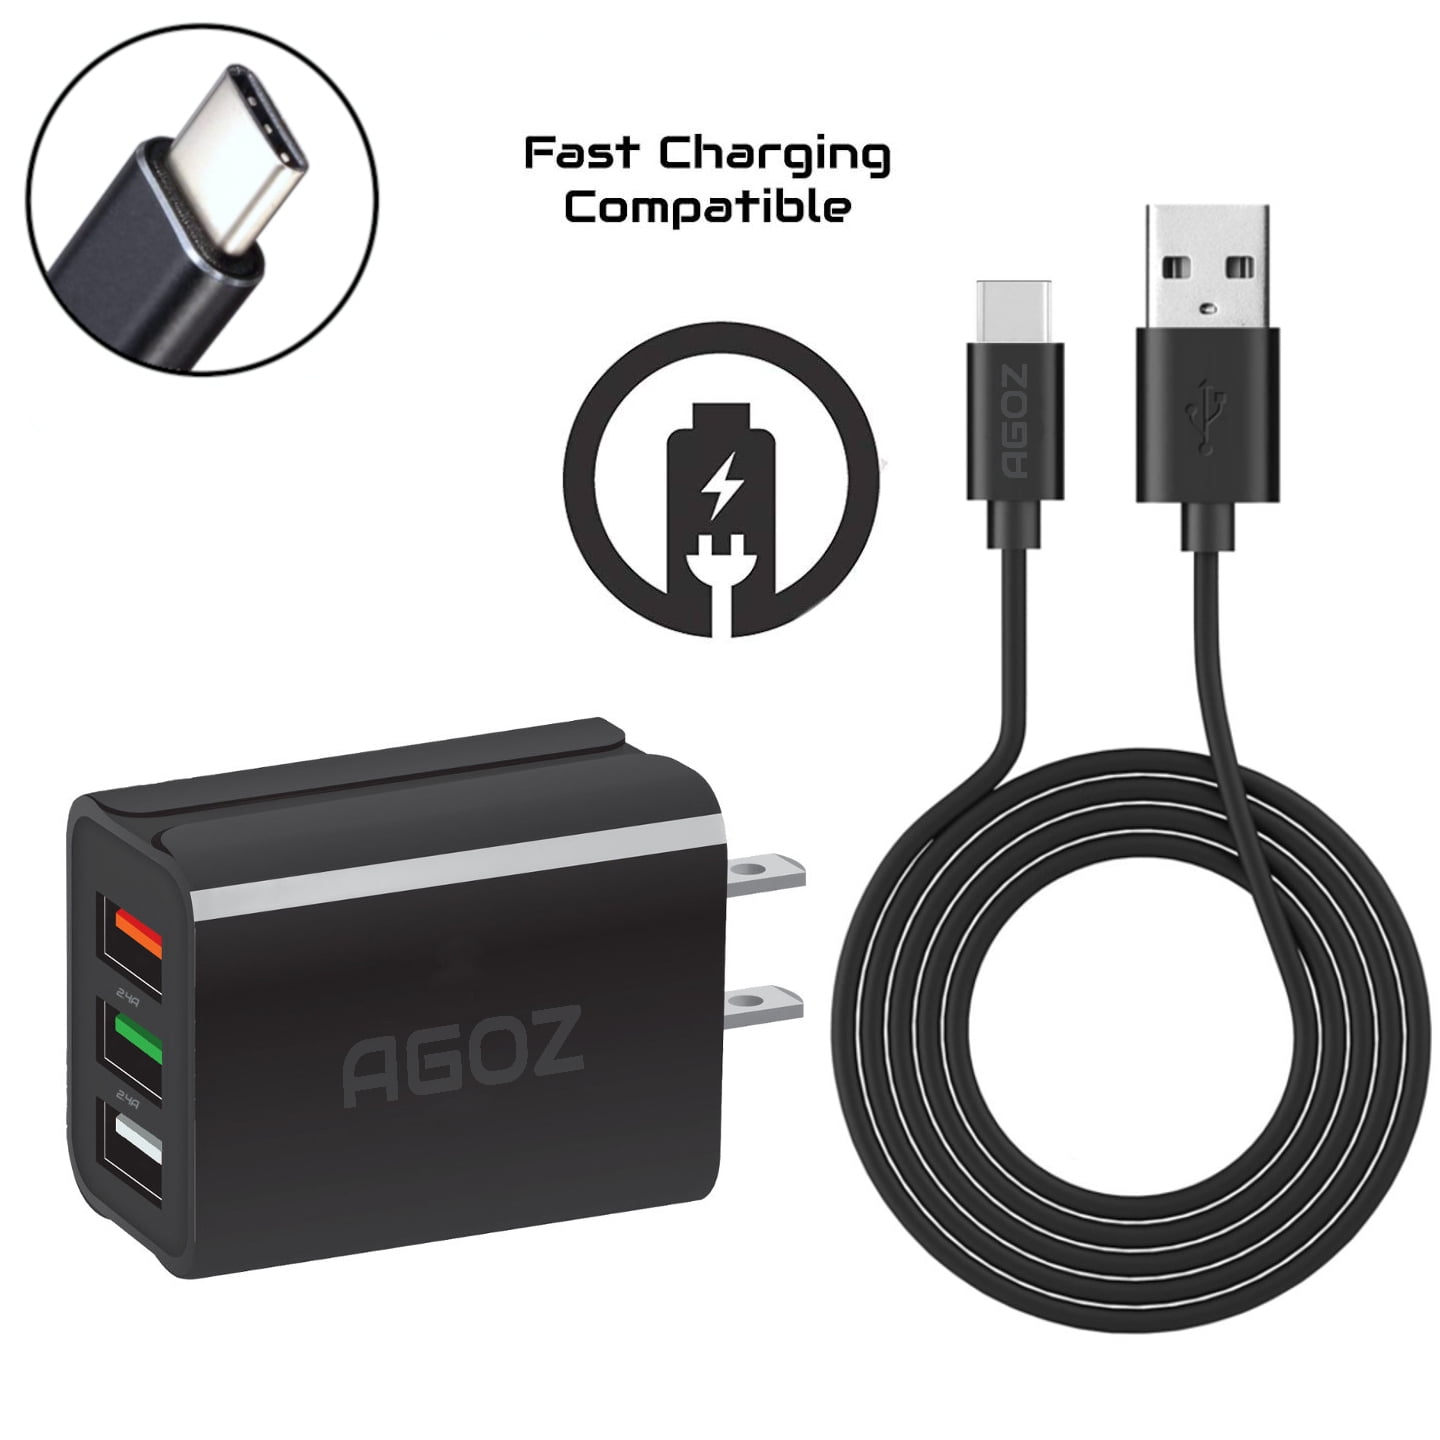 Agoz 3 USB Port Wall Fast Charger Adapter For Motorola Moto G7, G7 Play, G7 Plus, G7 Power, G7 Supra, Moto Z4, Z3 Play, Z2 Force, Z2 Play, Z Droid Edition, Z Force, Moto X4 + 6ft USB-C Cable